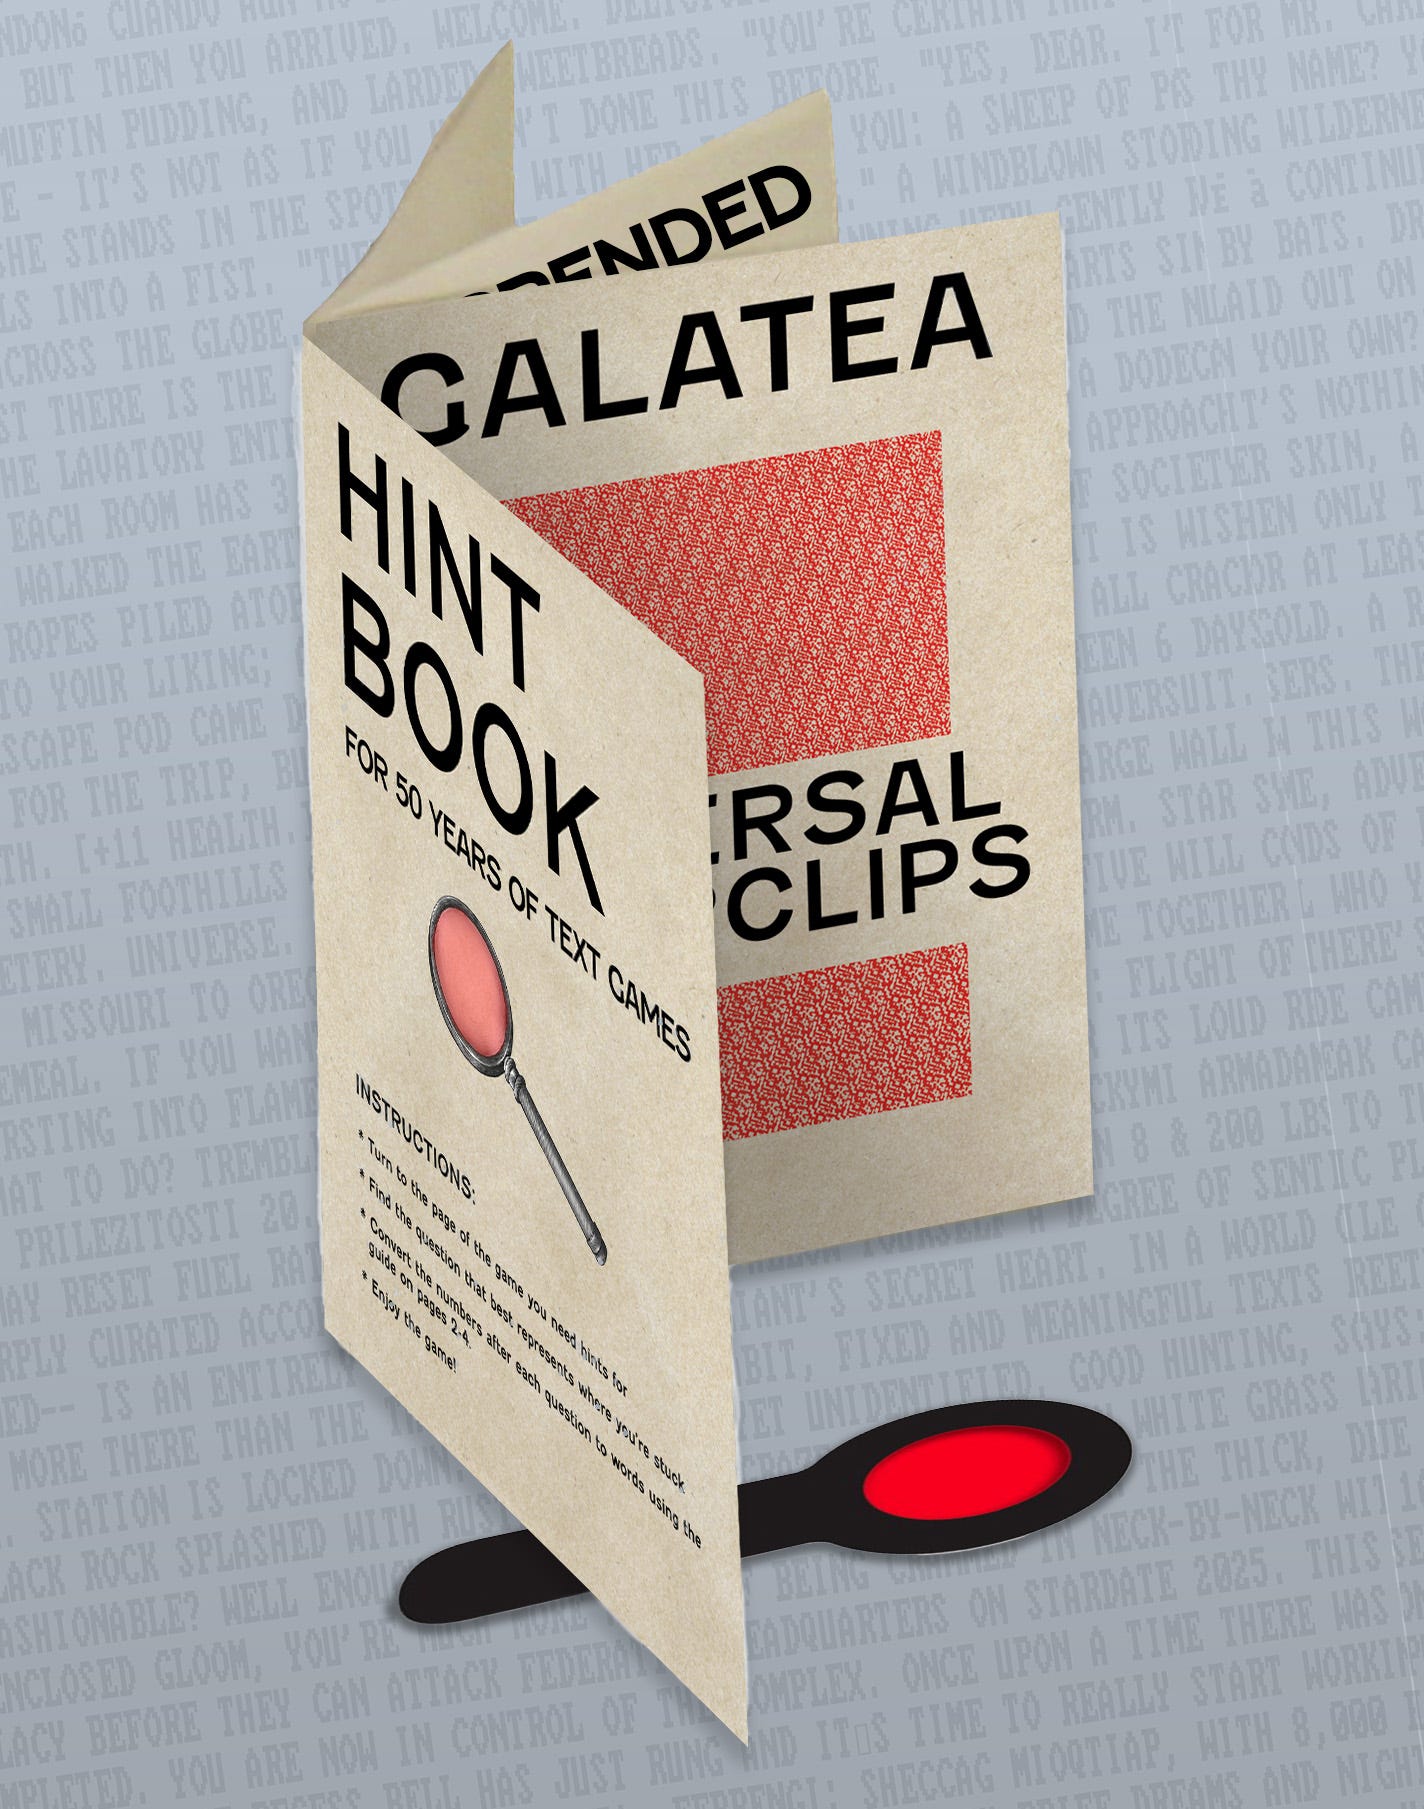 Hint book zine showing hints obfuscated by red pattern.